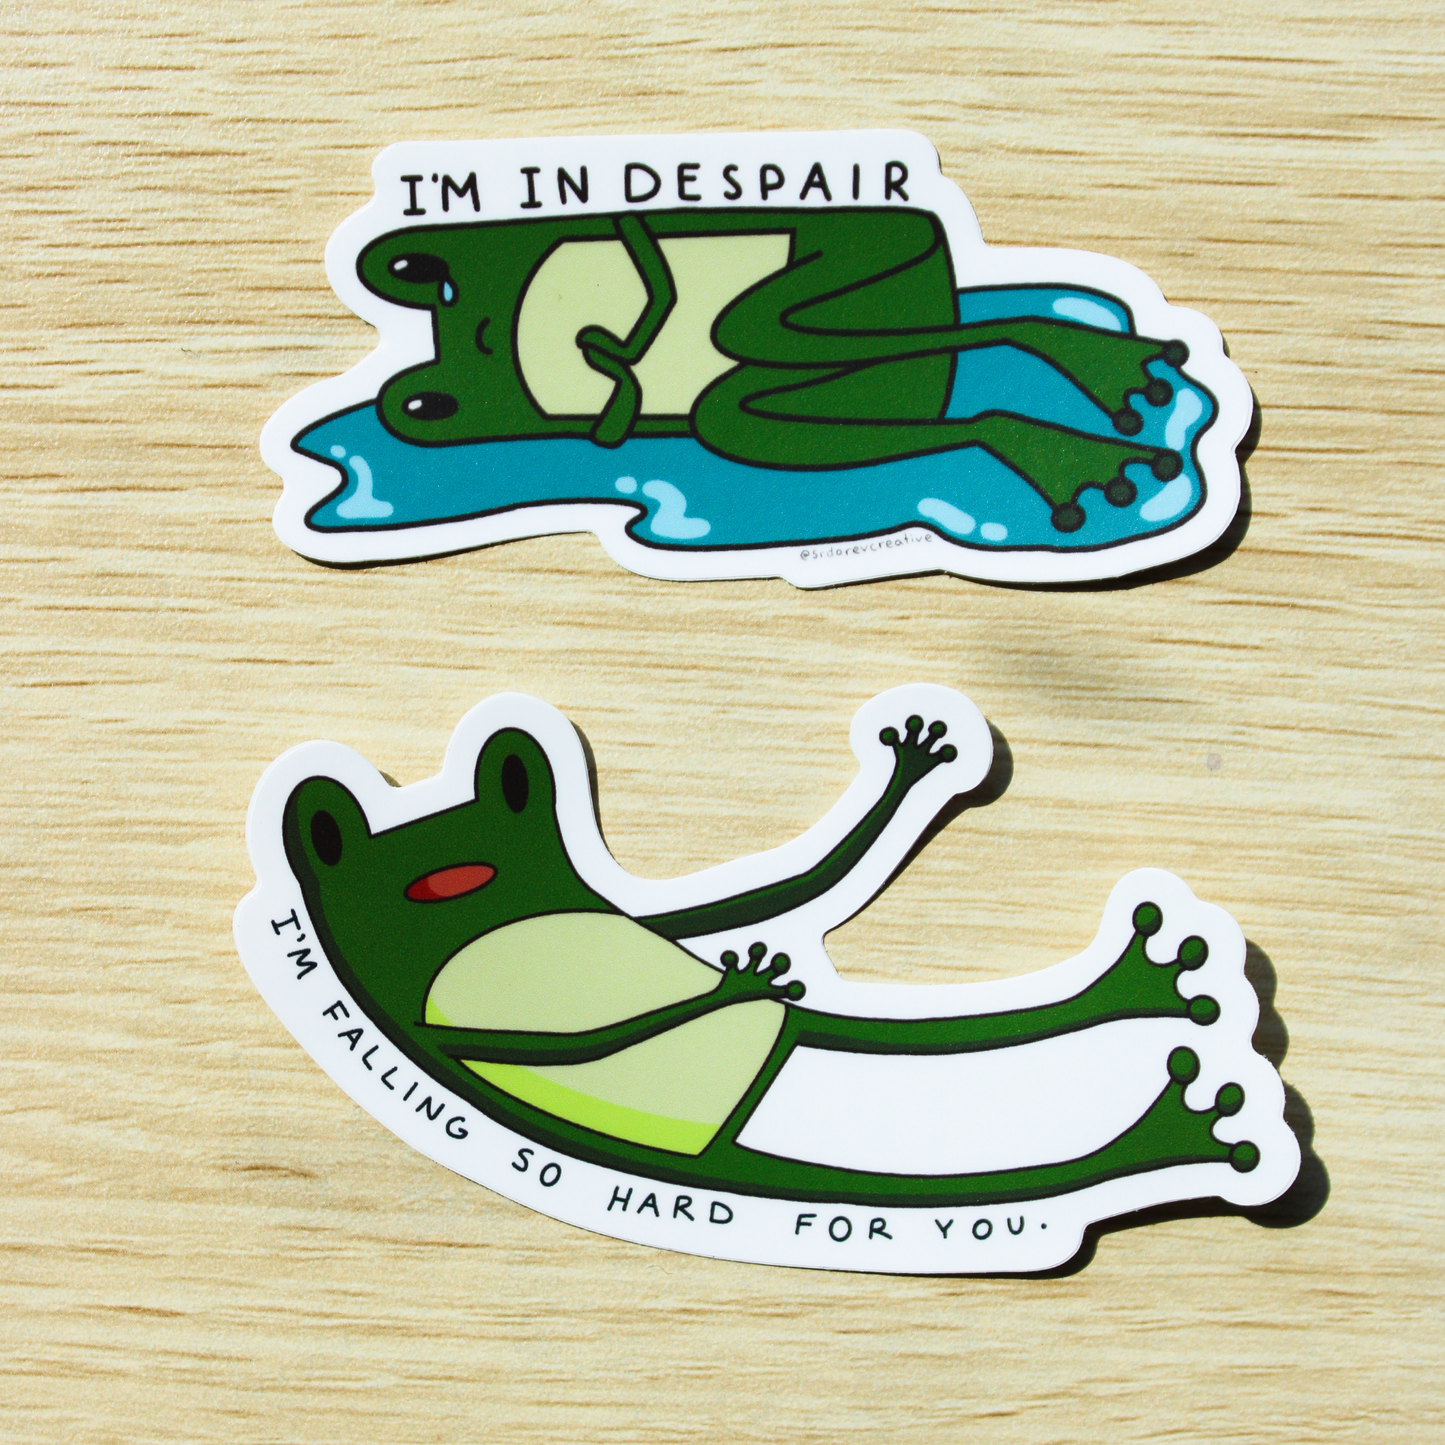 On the top is a sticker of a cartoon frog crying curled up a in a puddle of tears with the words "I'M IN DESPAIR" on top.Below that, a sticker of a green cartoon frog falling with the words "I'M FALLING SO HARD FOR YOU." underneath. The background is a wooden table.